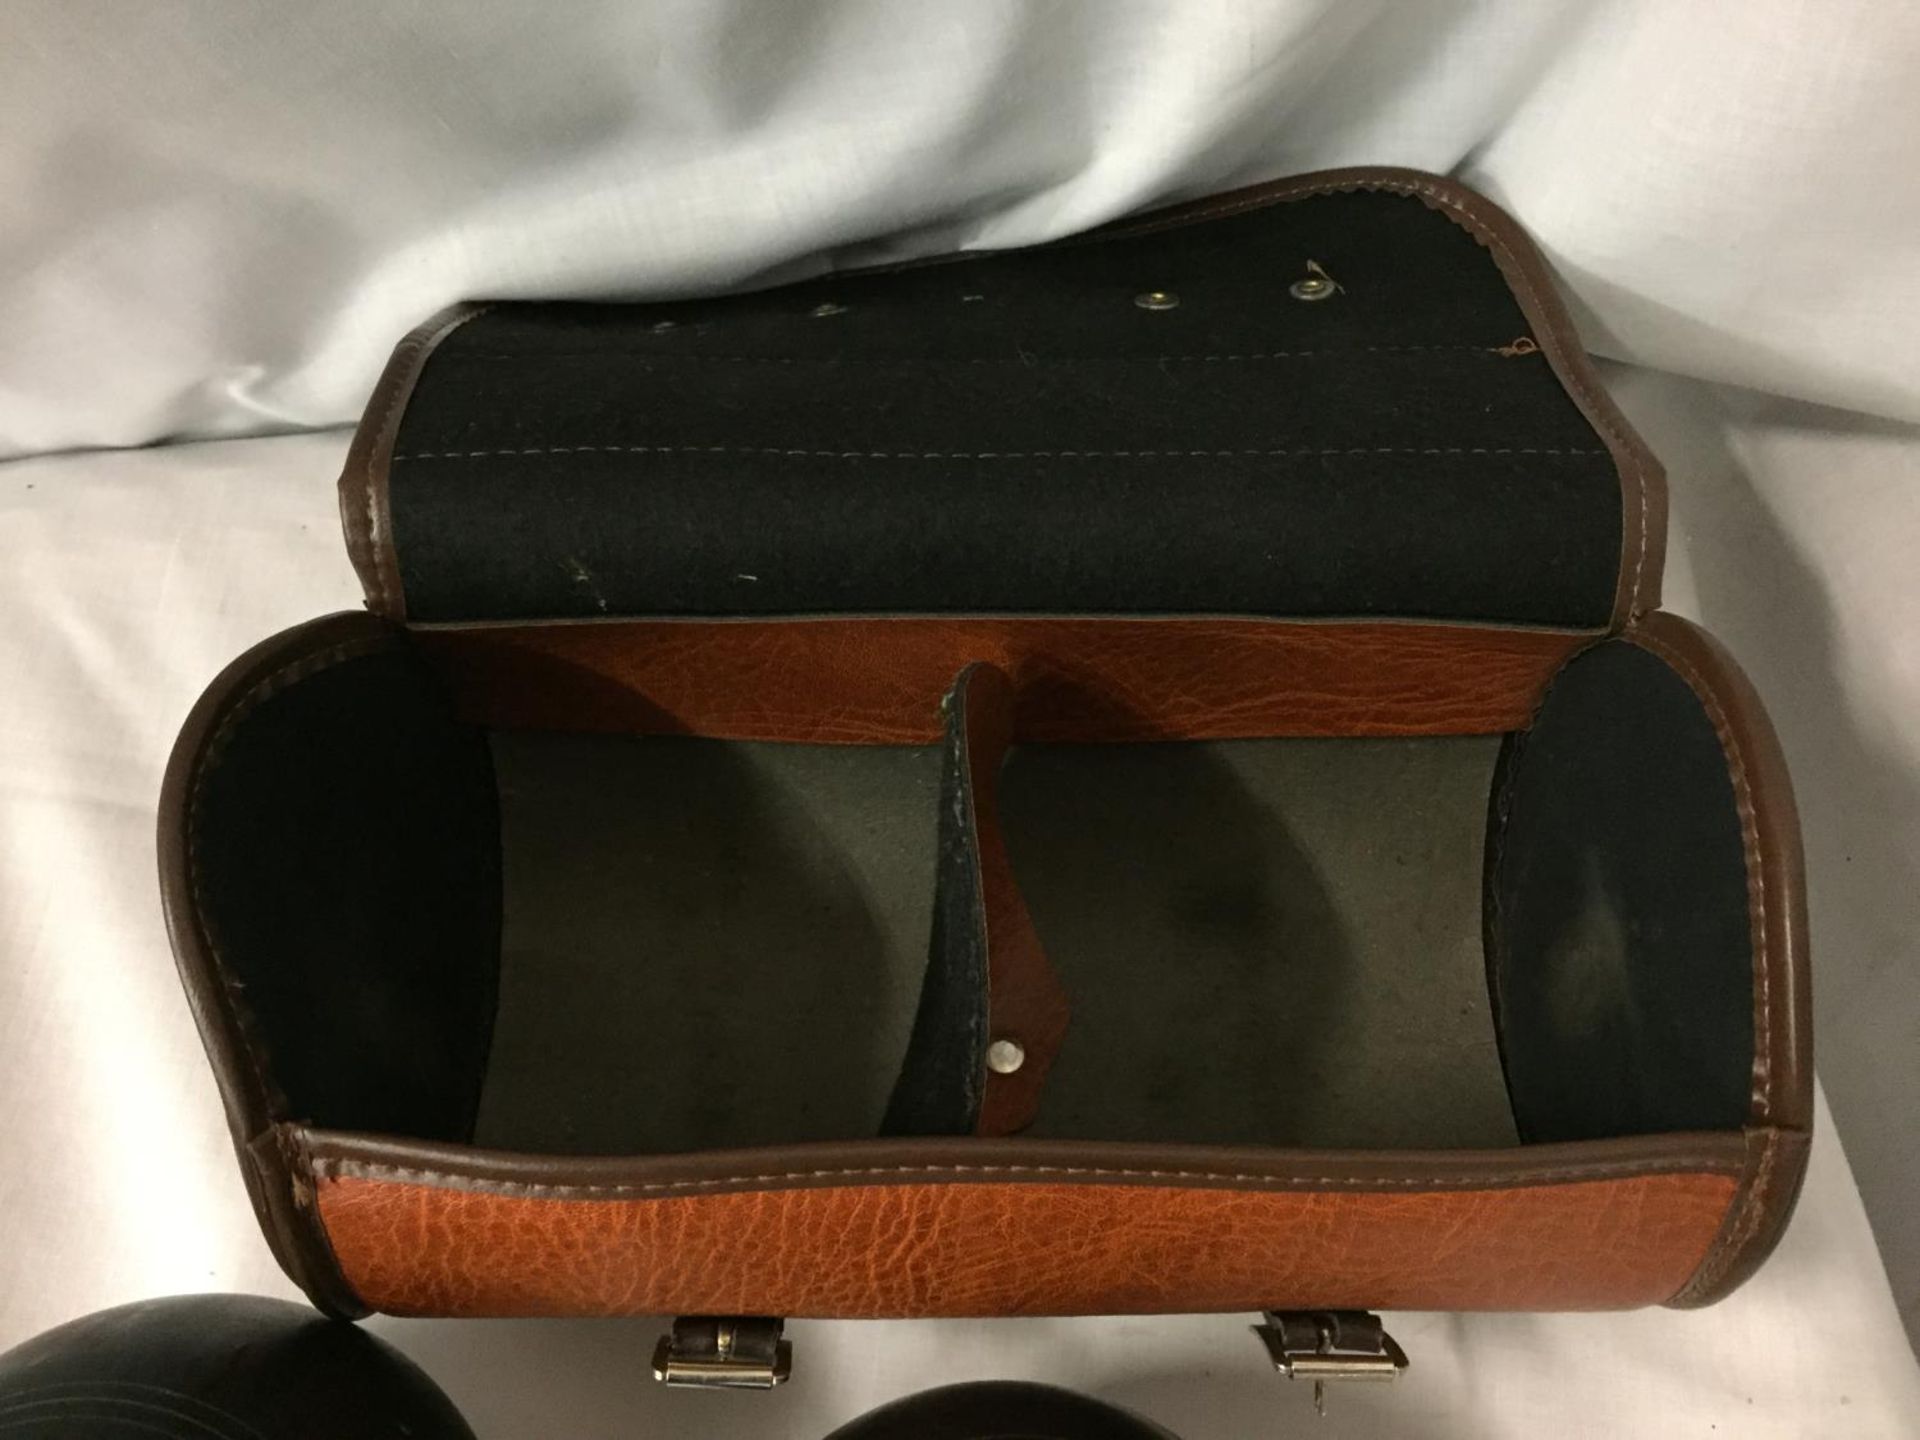 A PAIR OF TAYLOR TRIPLE CROWN BOWLS IN CARRYING CASE - Image 4 of 5